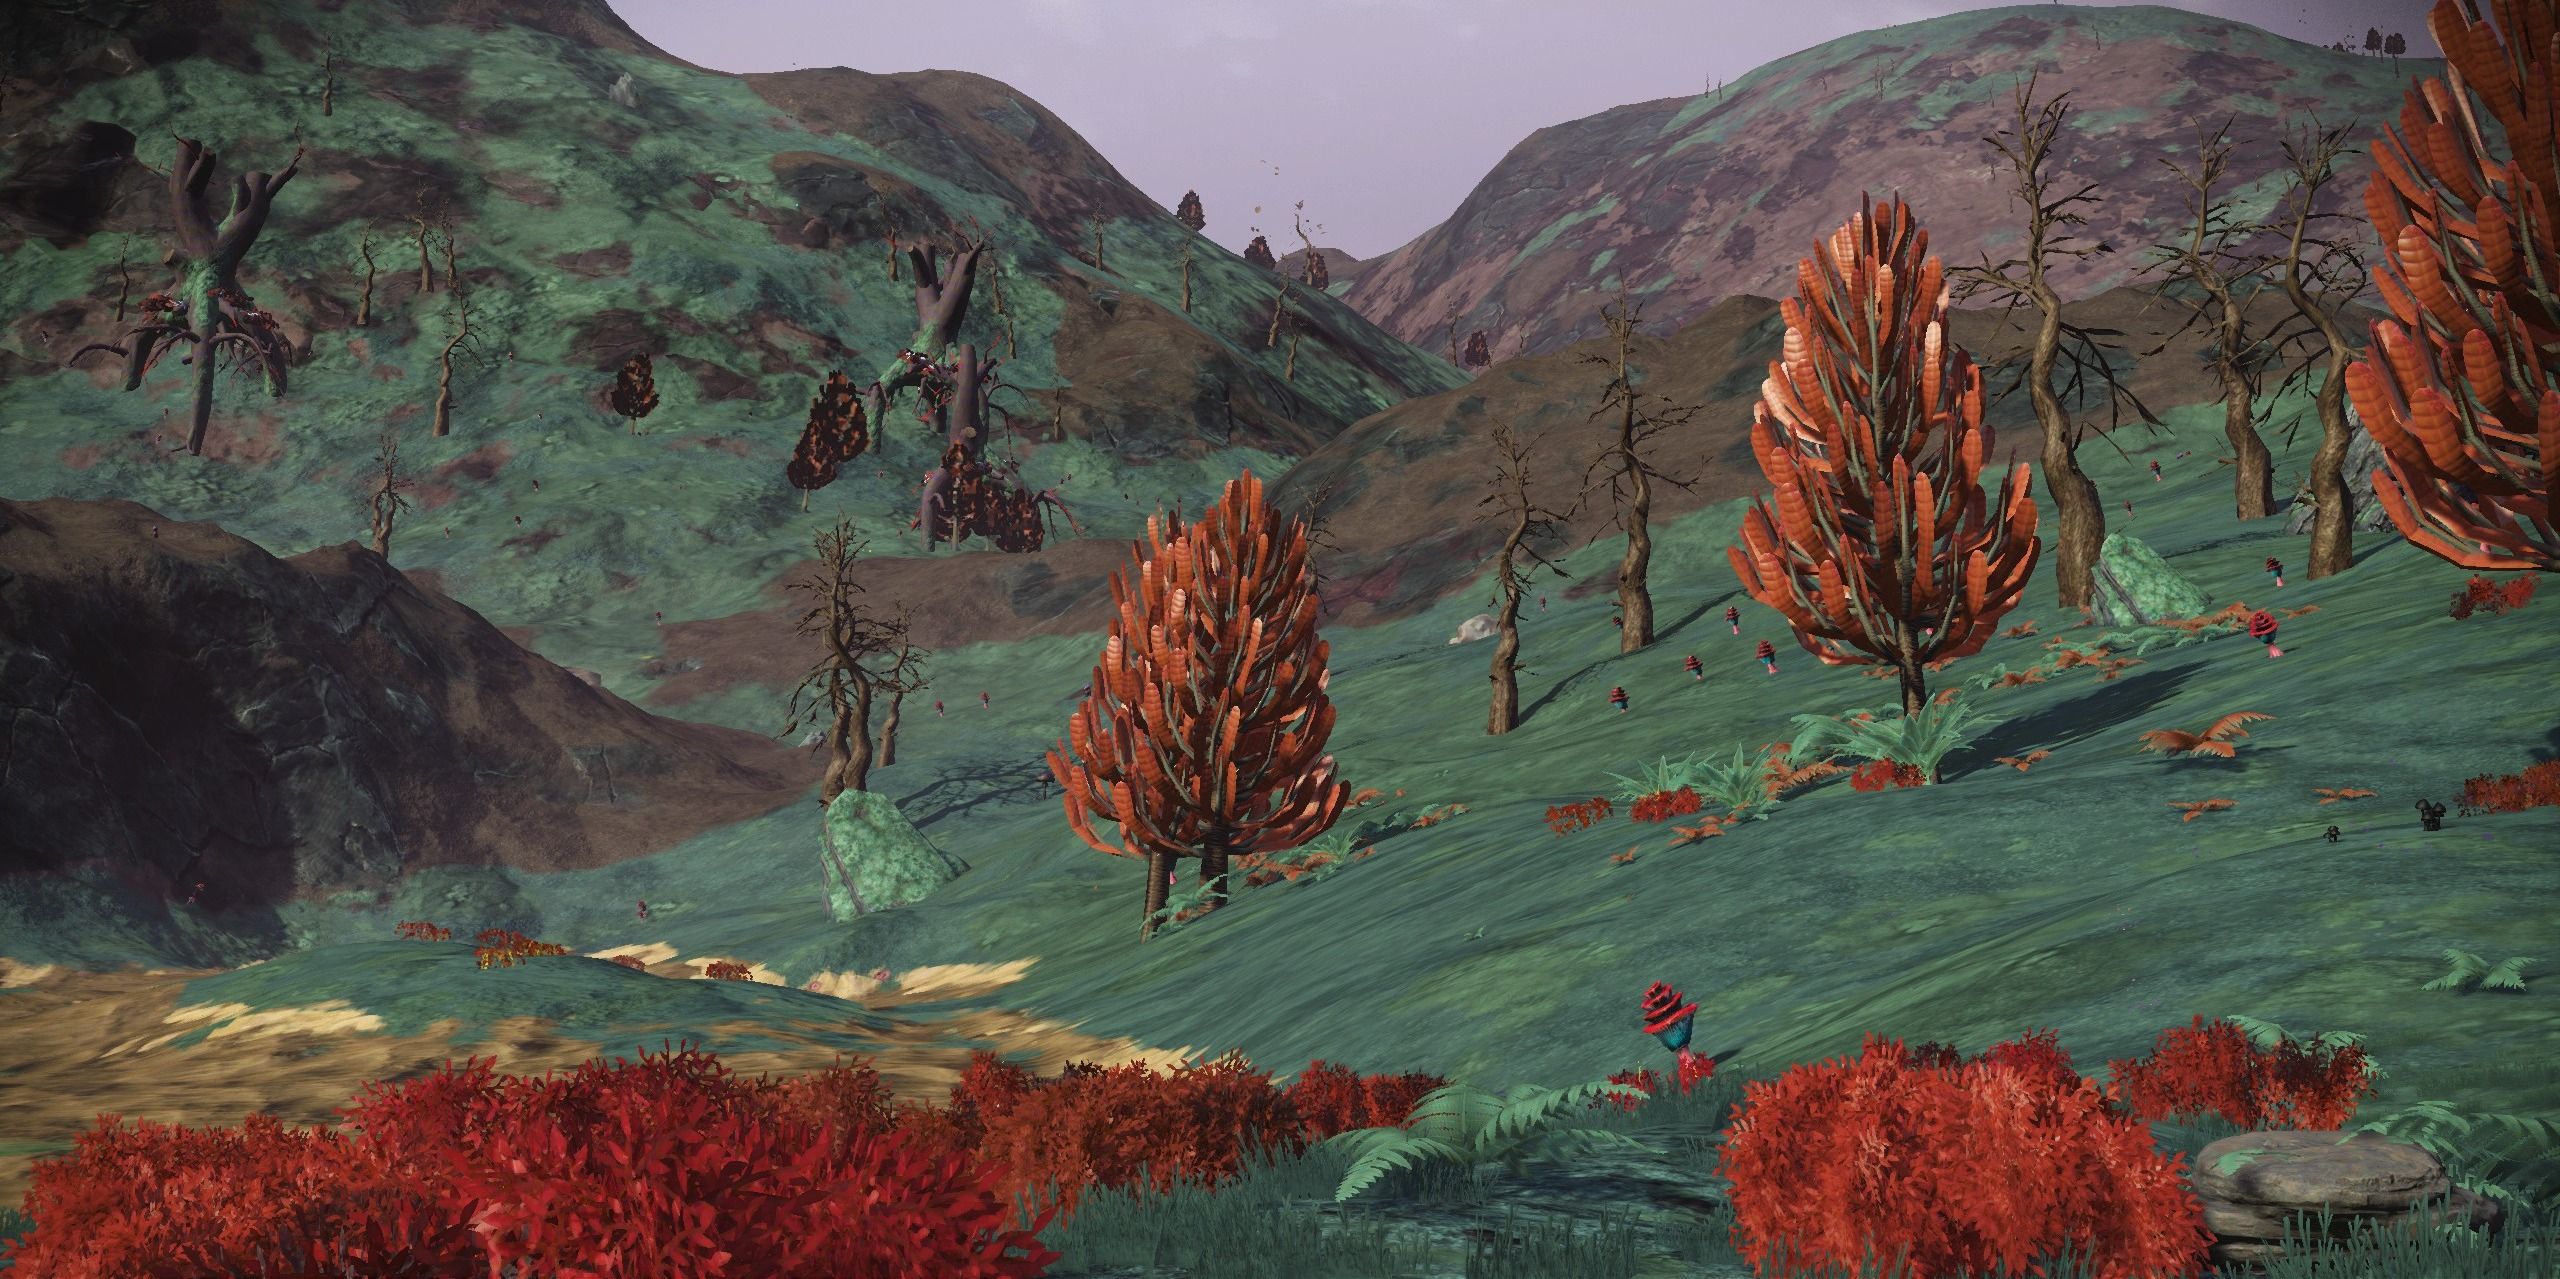 Marsh looking planet with trees and mountains